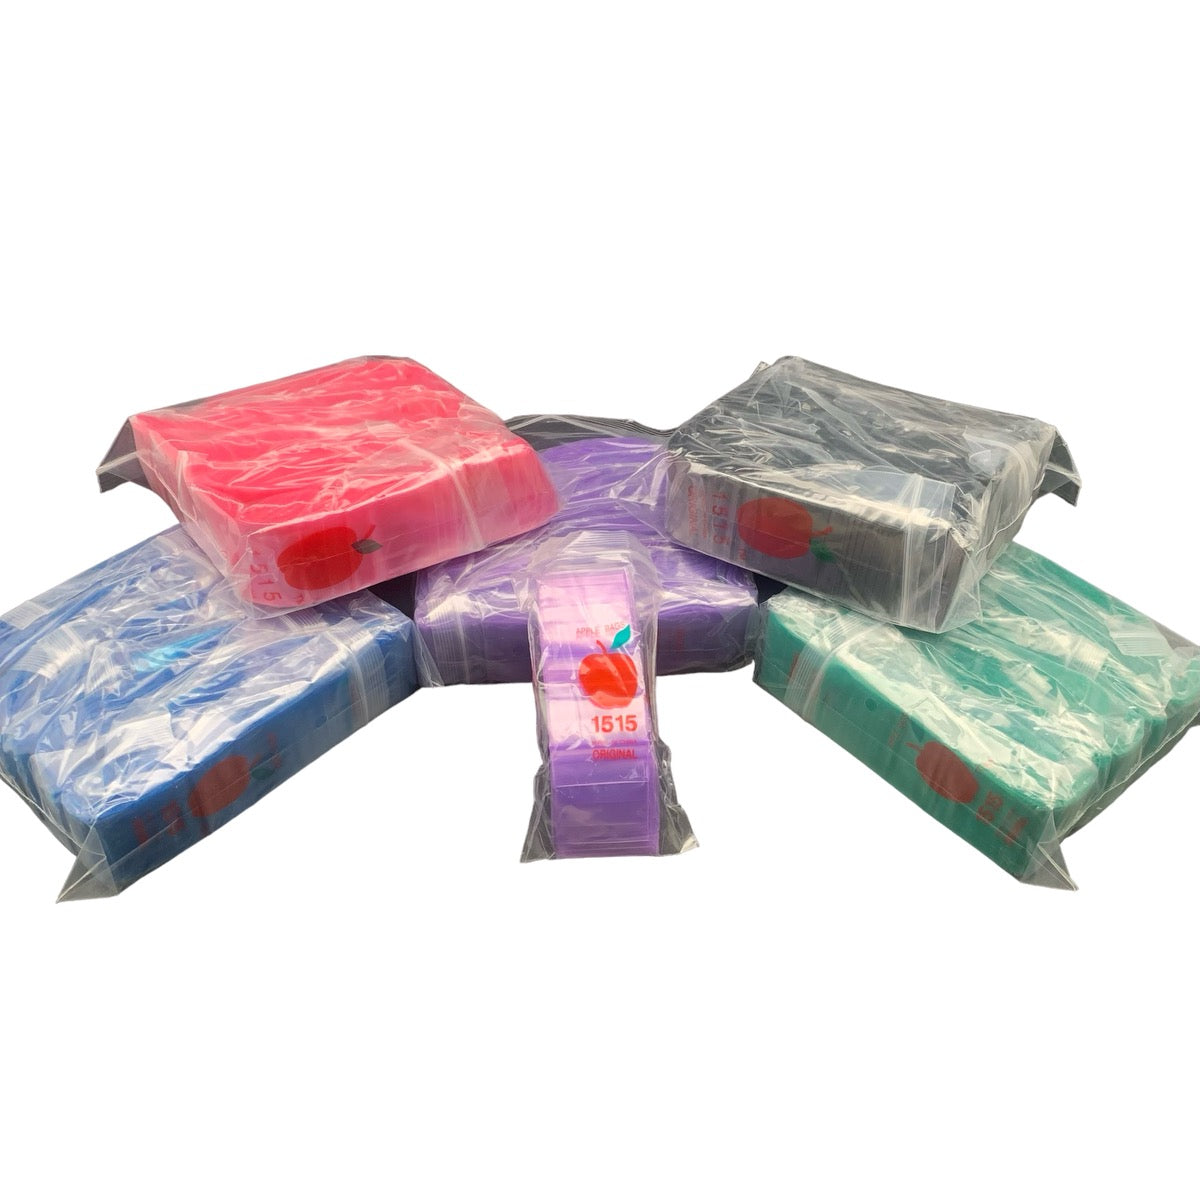 Colored Ziplock Baggies 1.5in by 1.5in, Bag of 10 Sets W/100 Bags Each (Colors Available) (B2B)